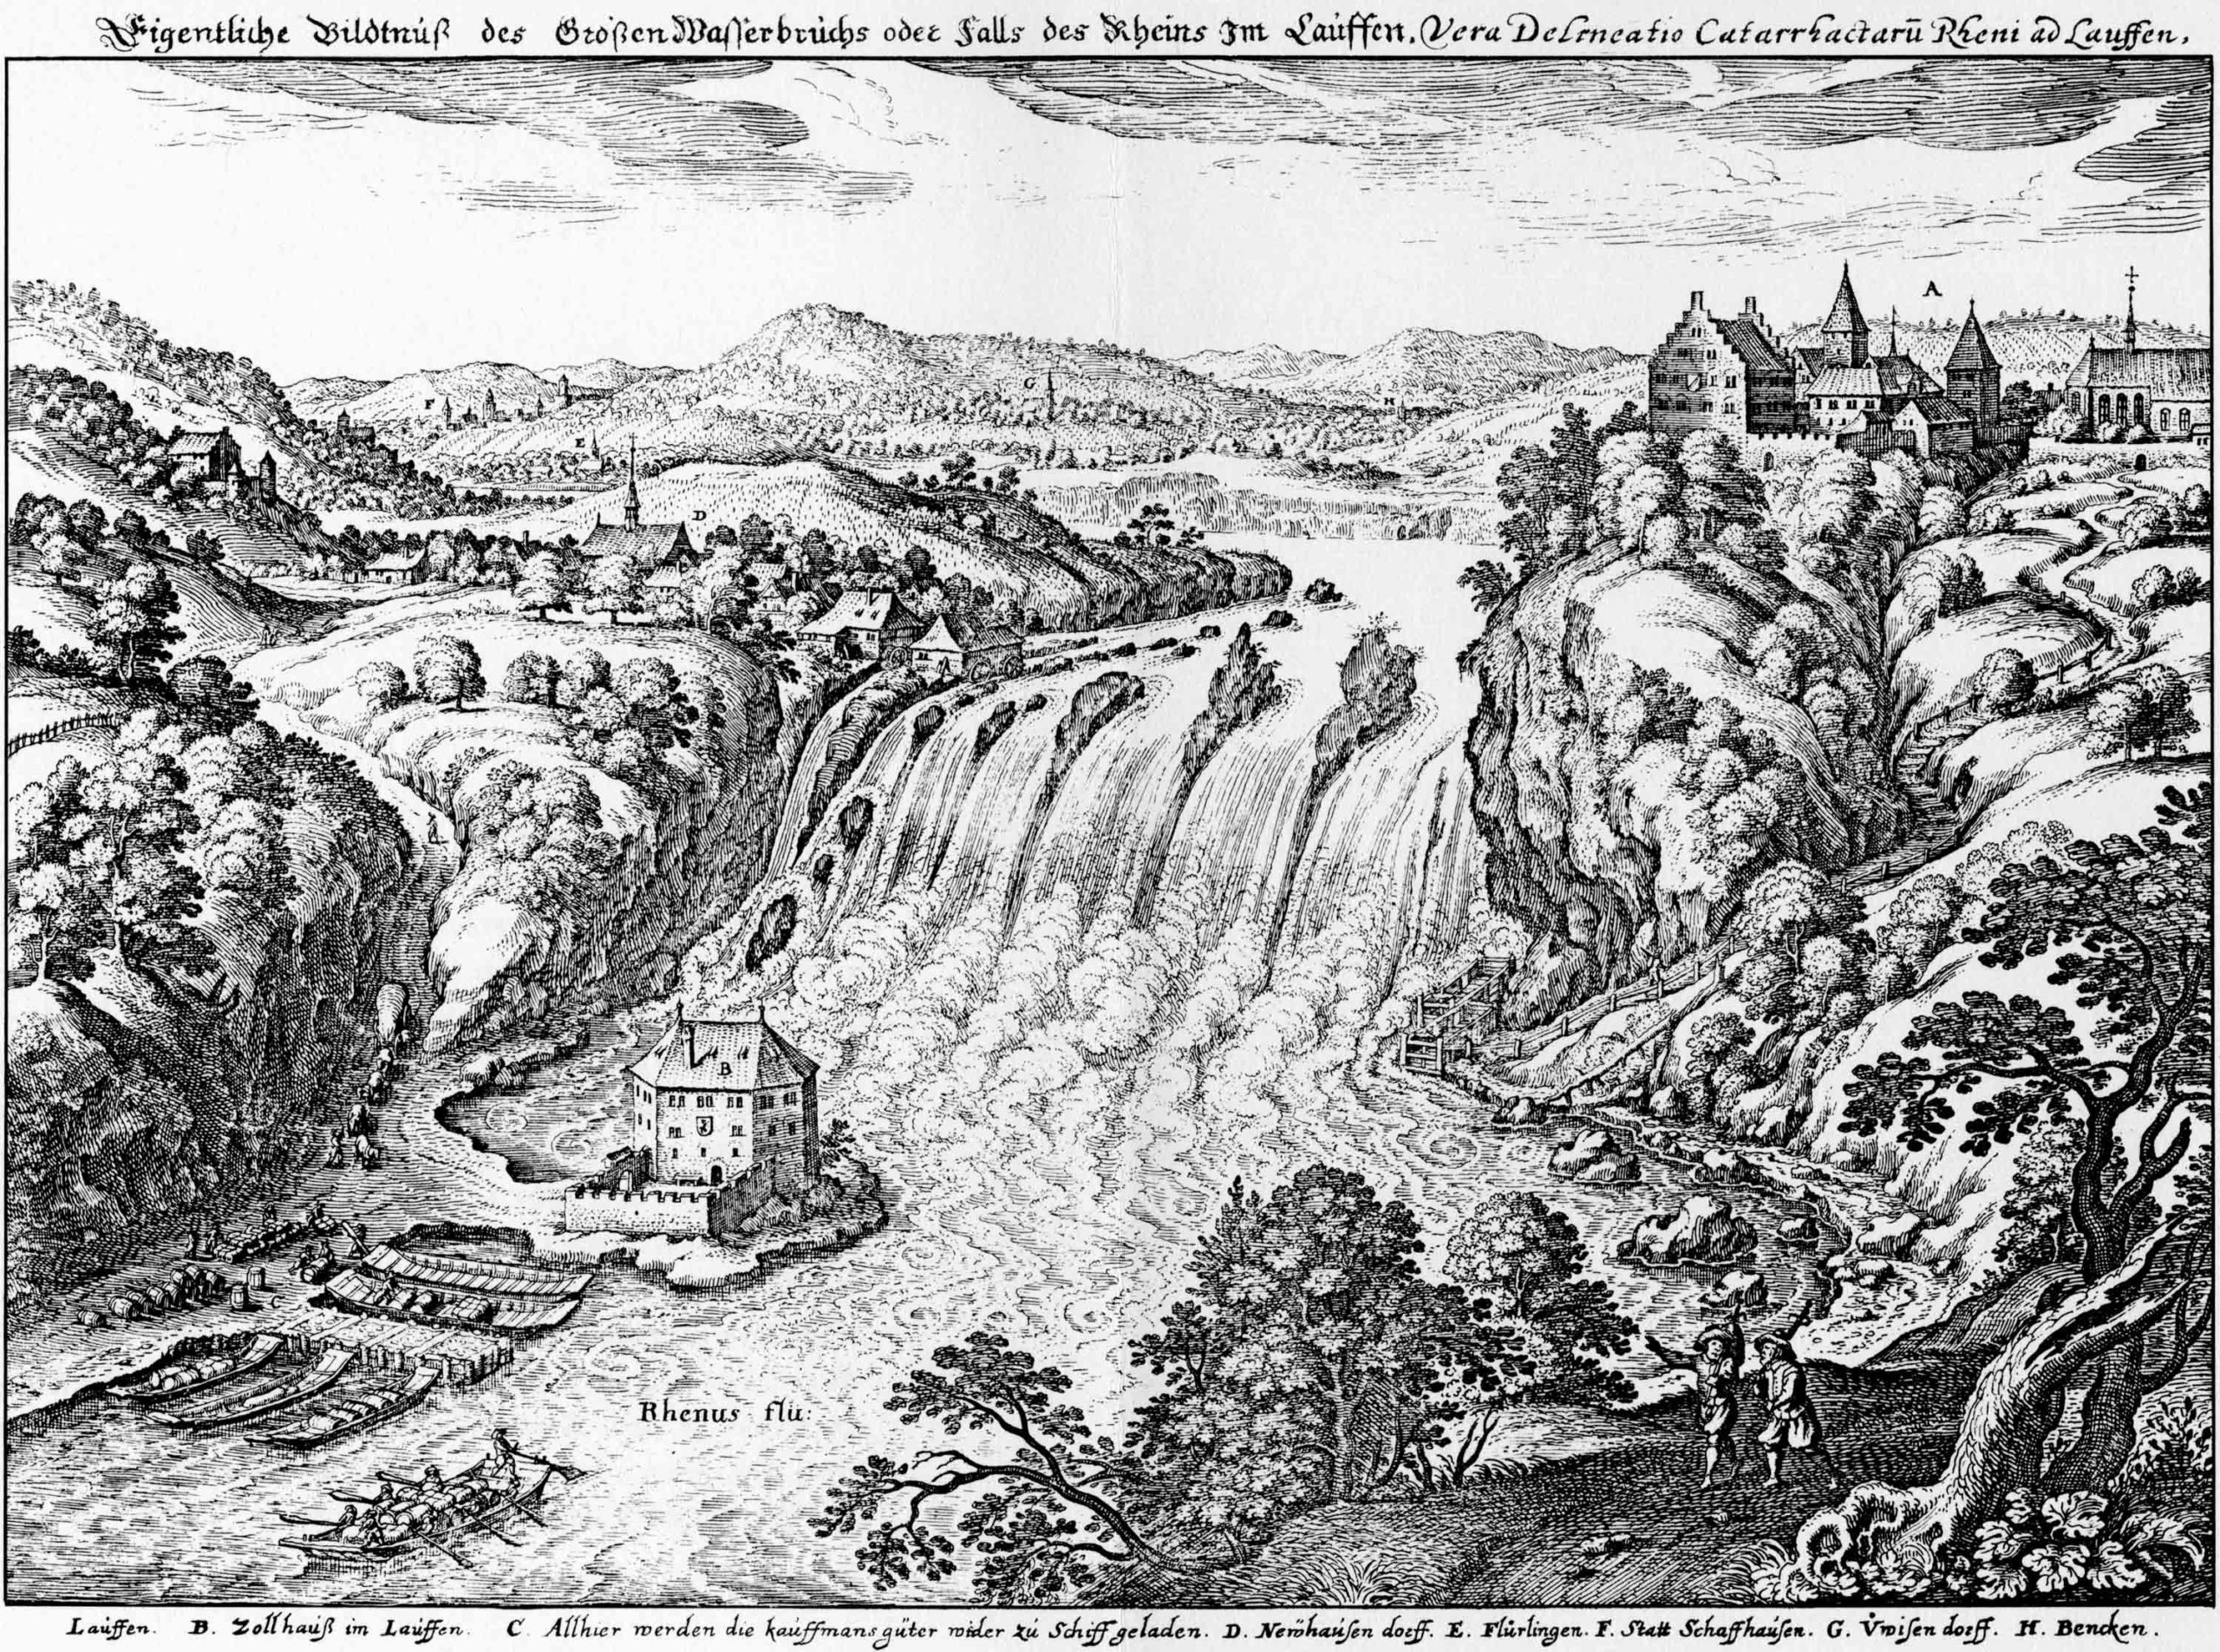 Depiction of the Rhine Falls in 1642 by Merian